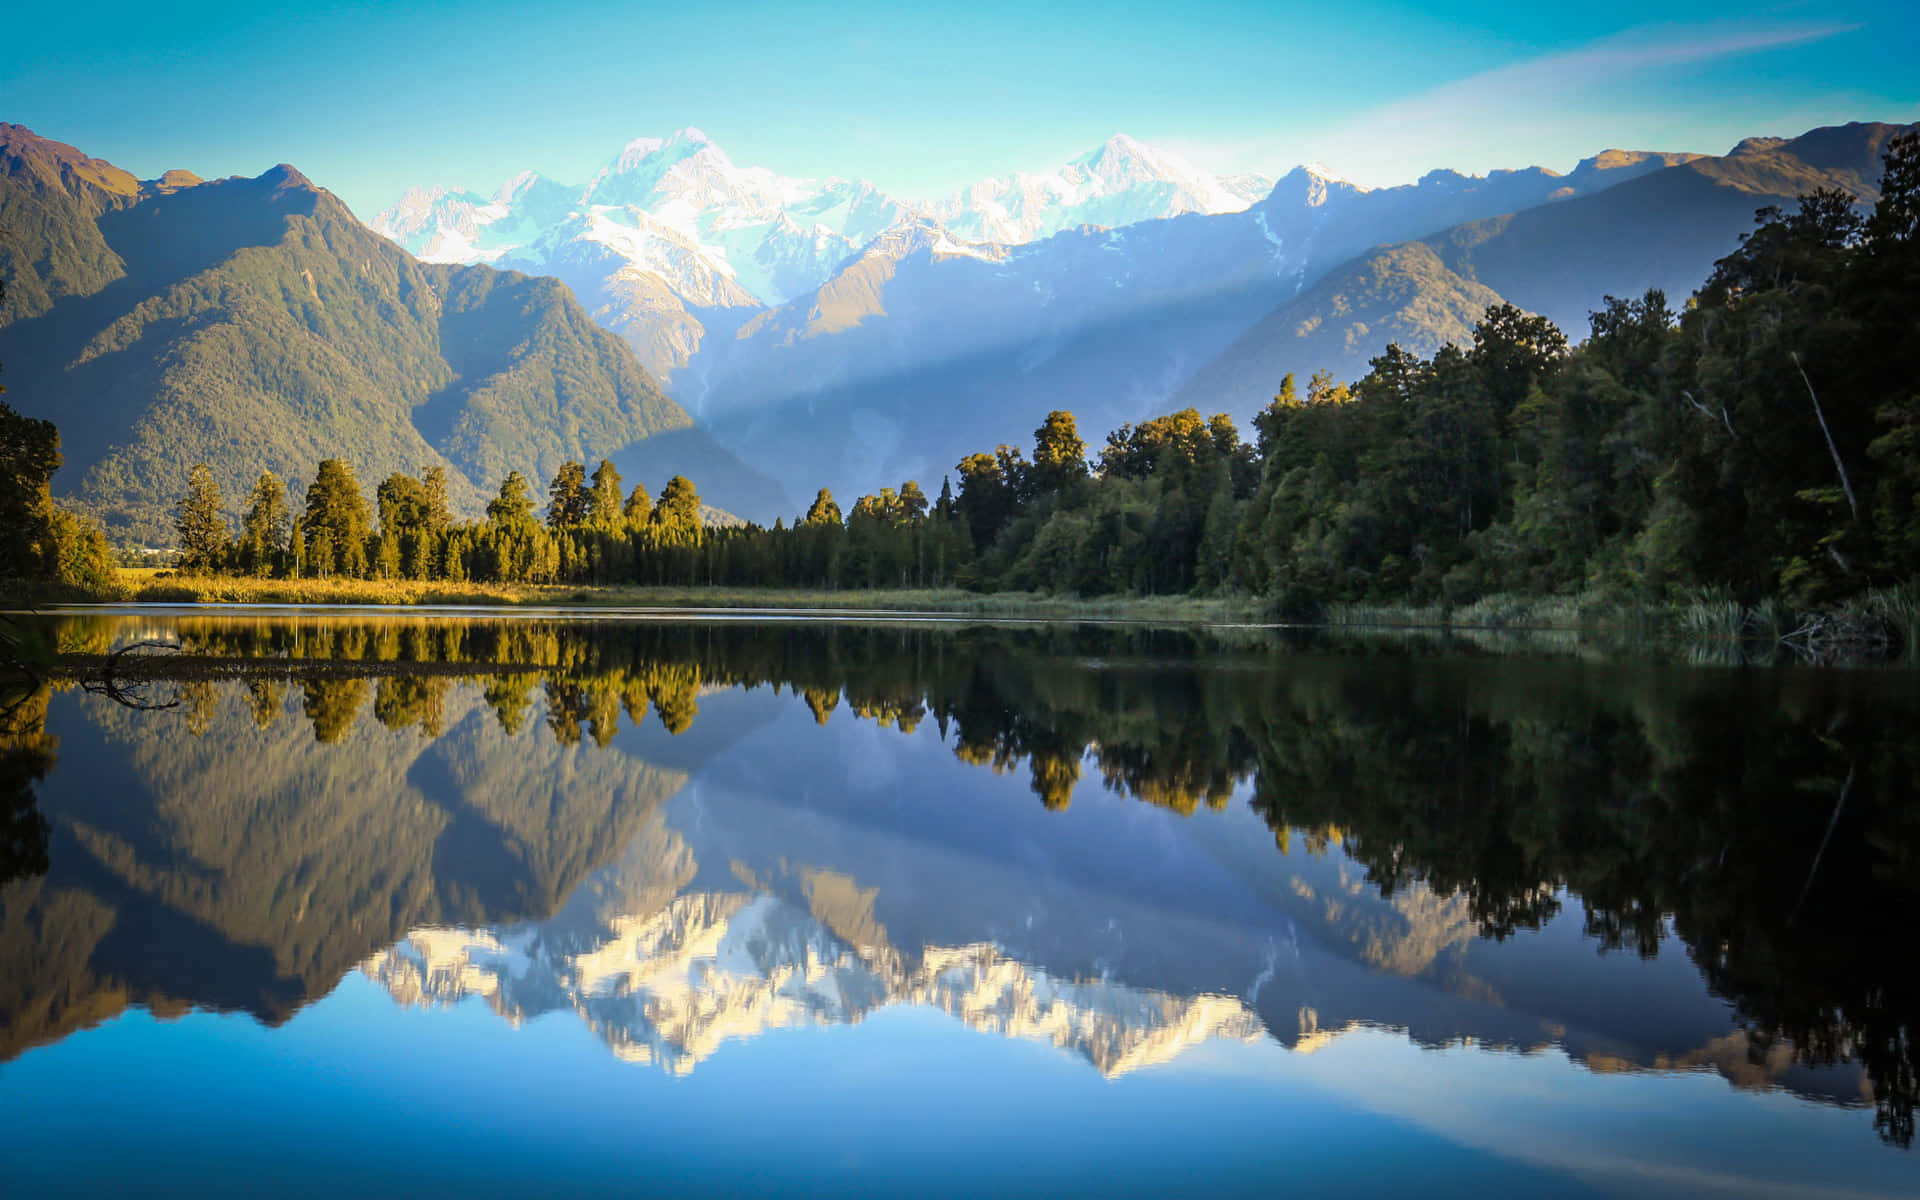 Download A Lake With Mountains Reflected In It | Wallpapers.com